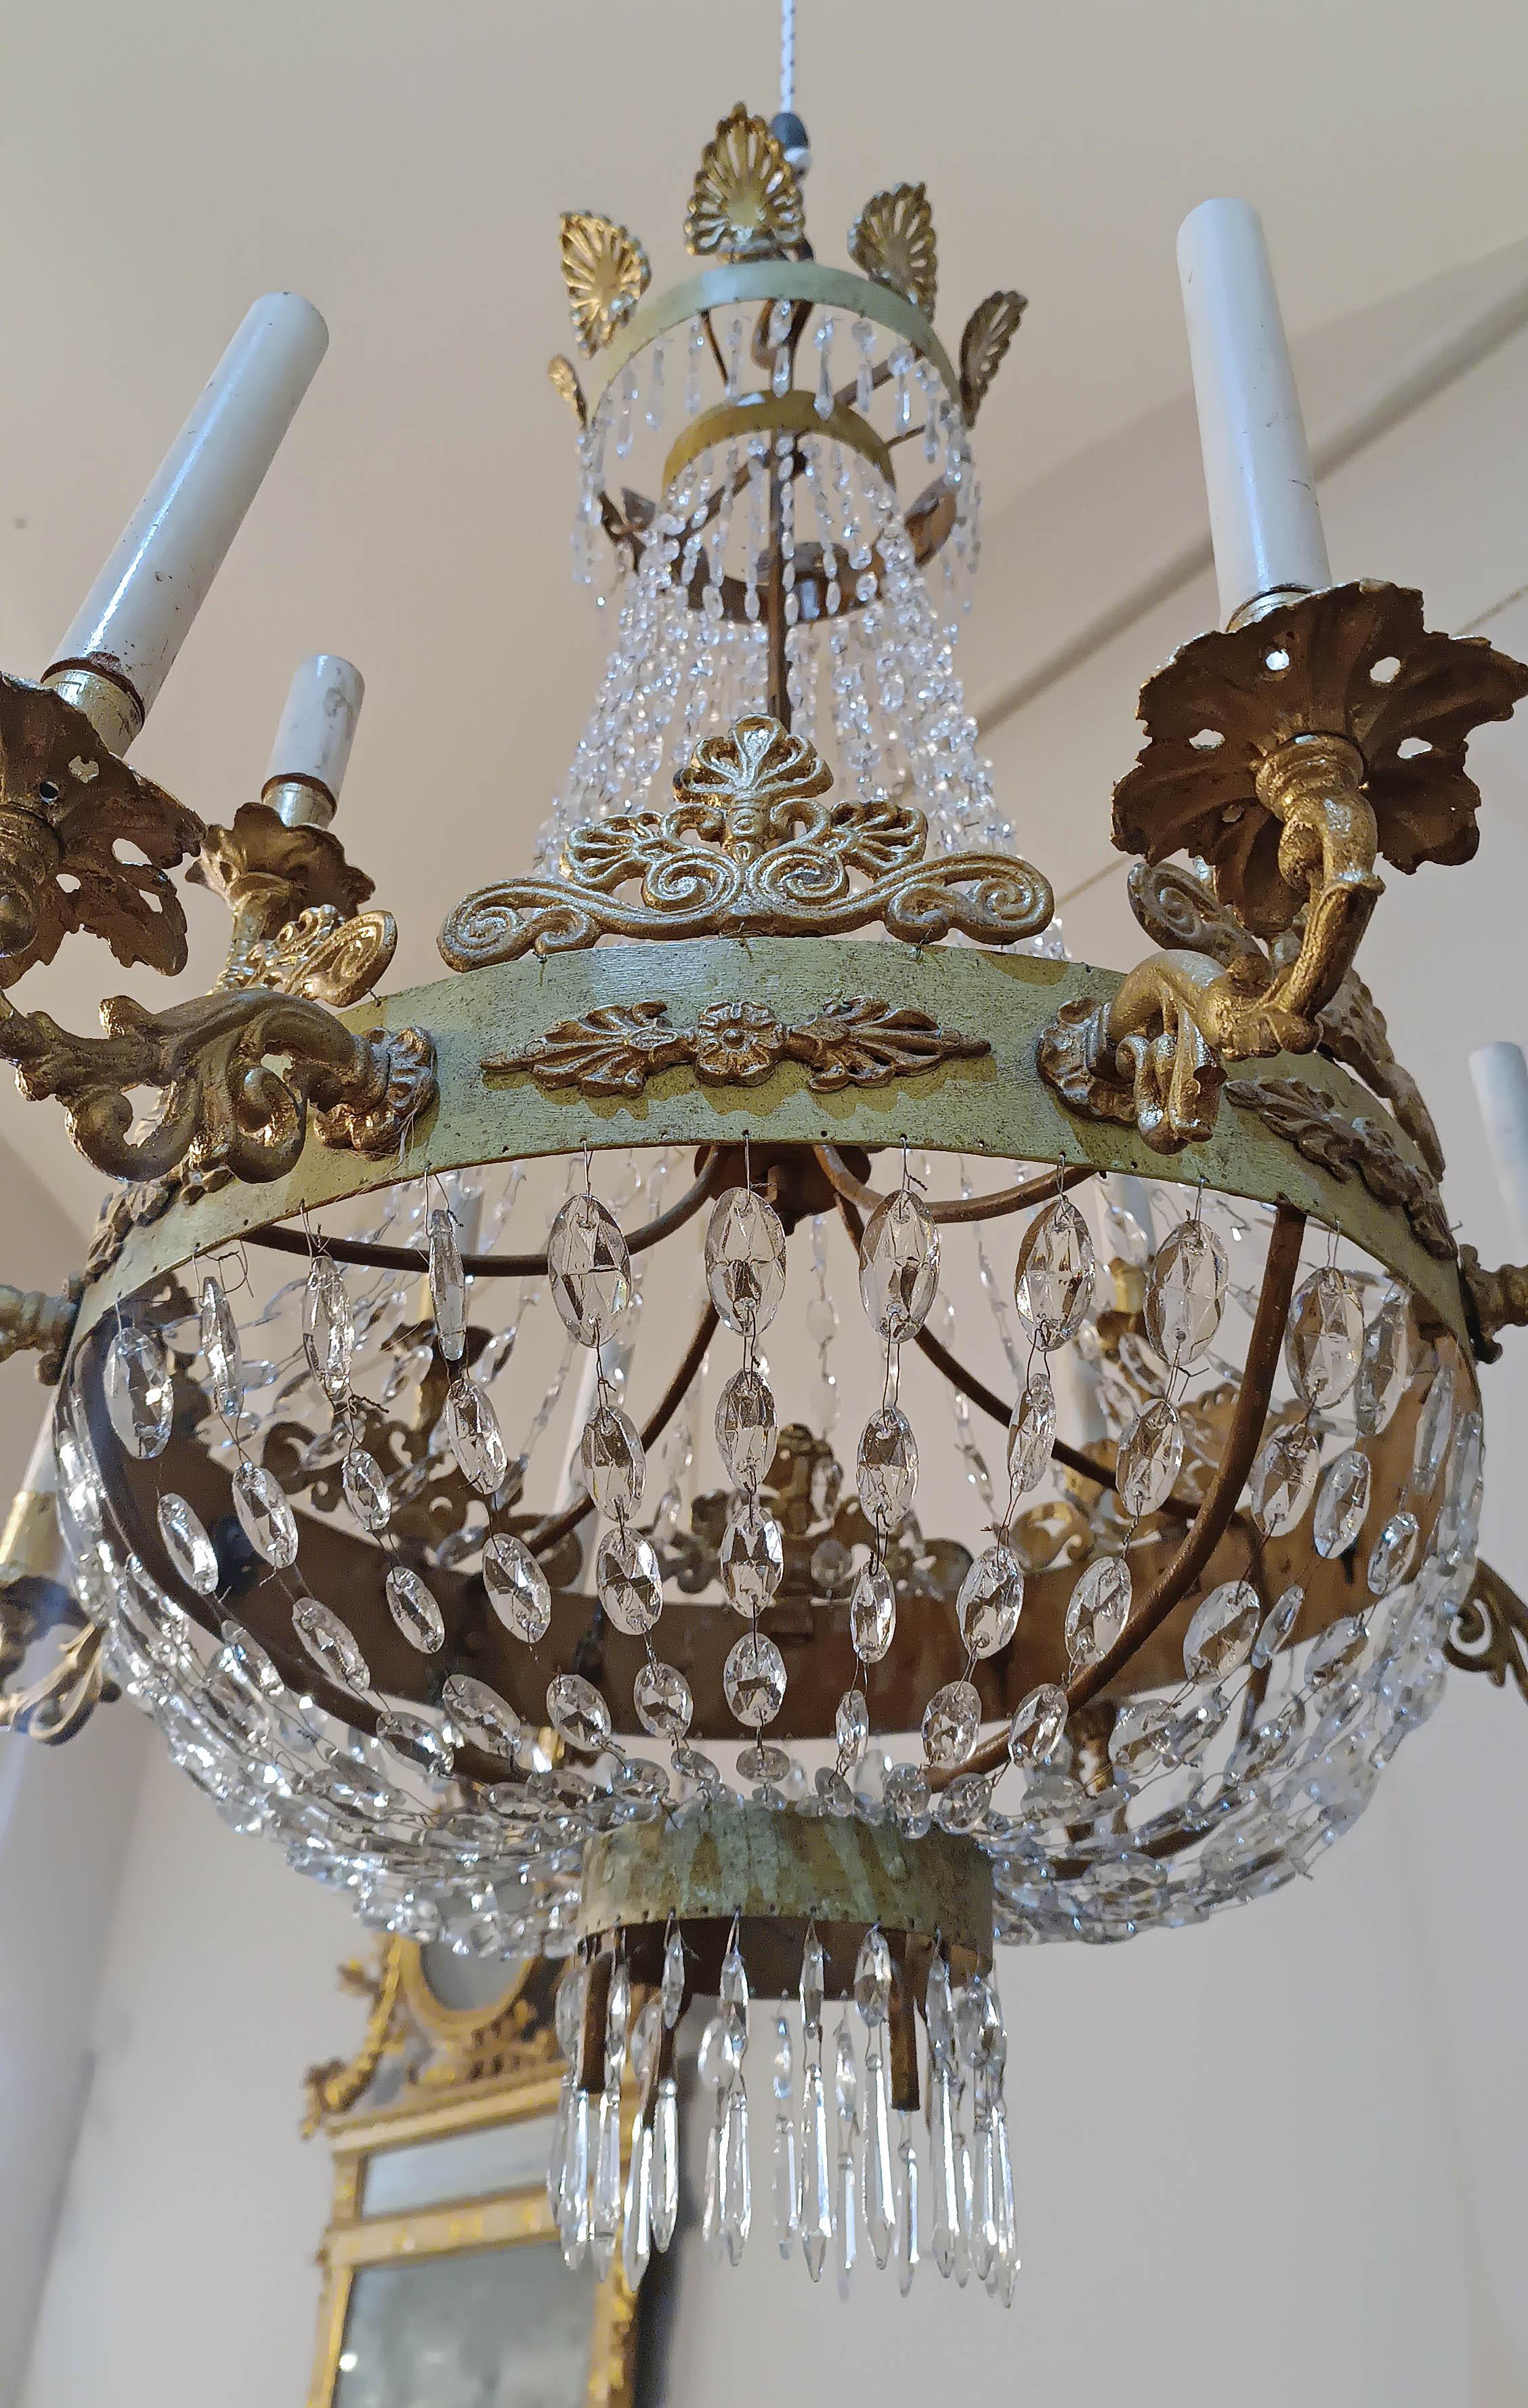 Beautiful and elegant tundish chandelier with twelve lights. Made of wrought iron with lead bobèches and cast metal candle holders, this chandelier features bands painted in a delicate sage green, enriched with gold-painted palmette decorations. The